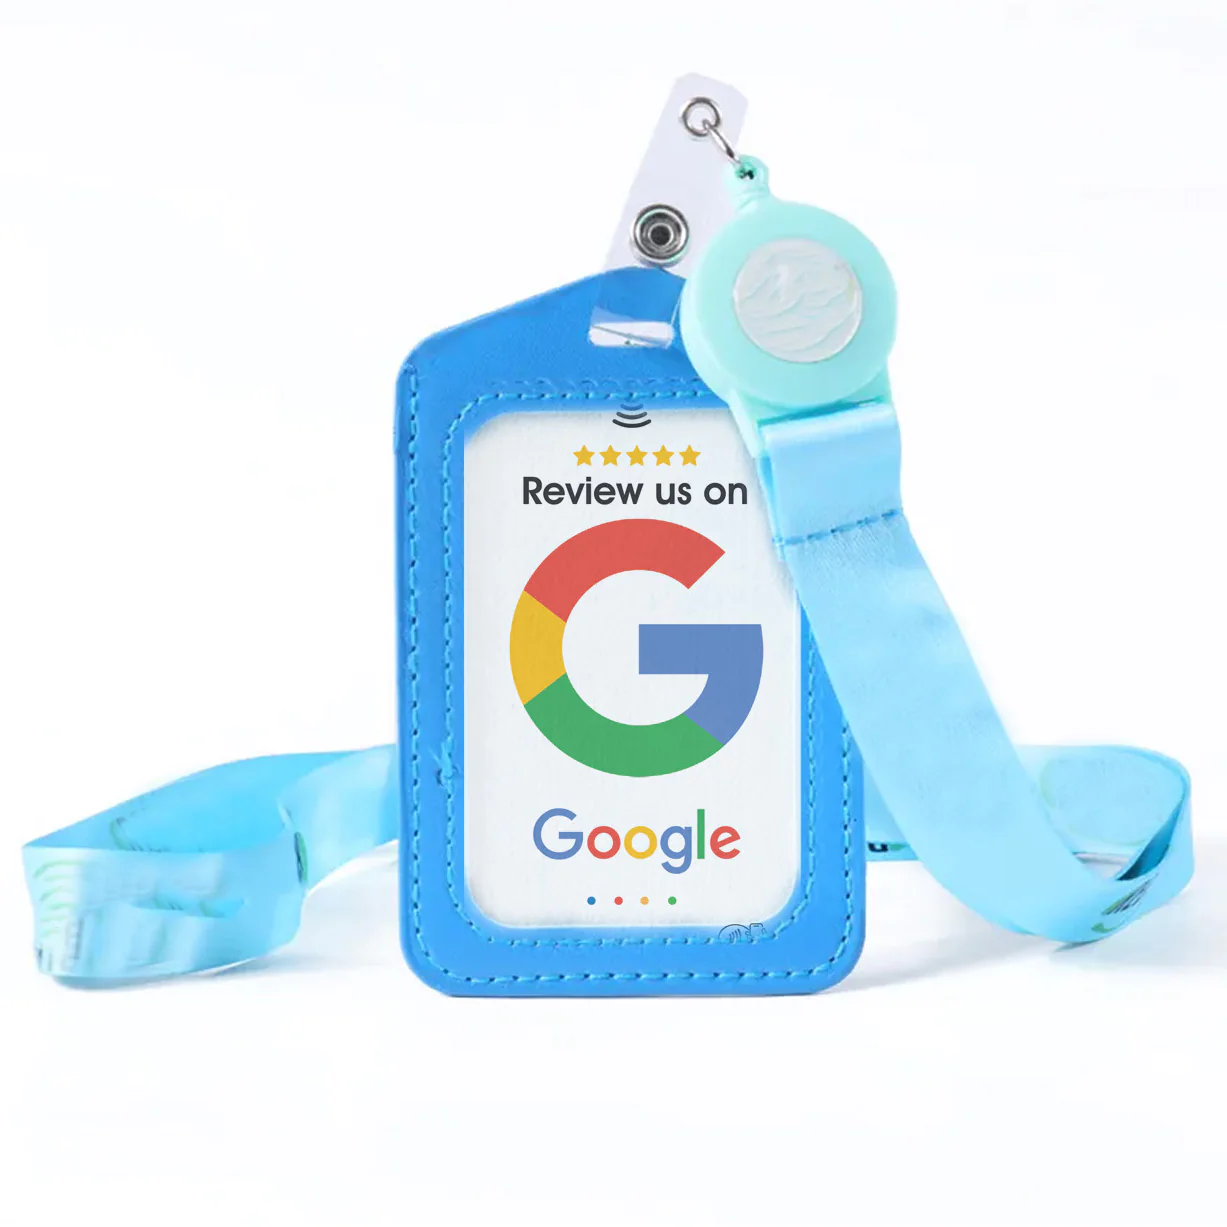 Card holder Neck lanyard For Google Review Card